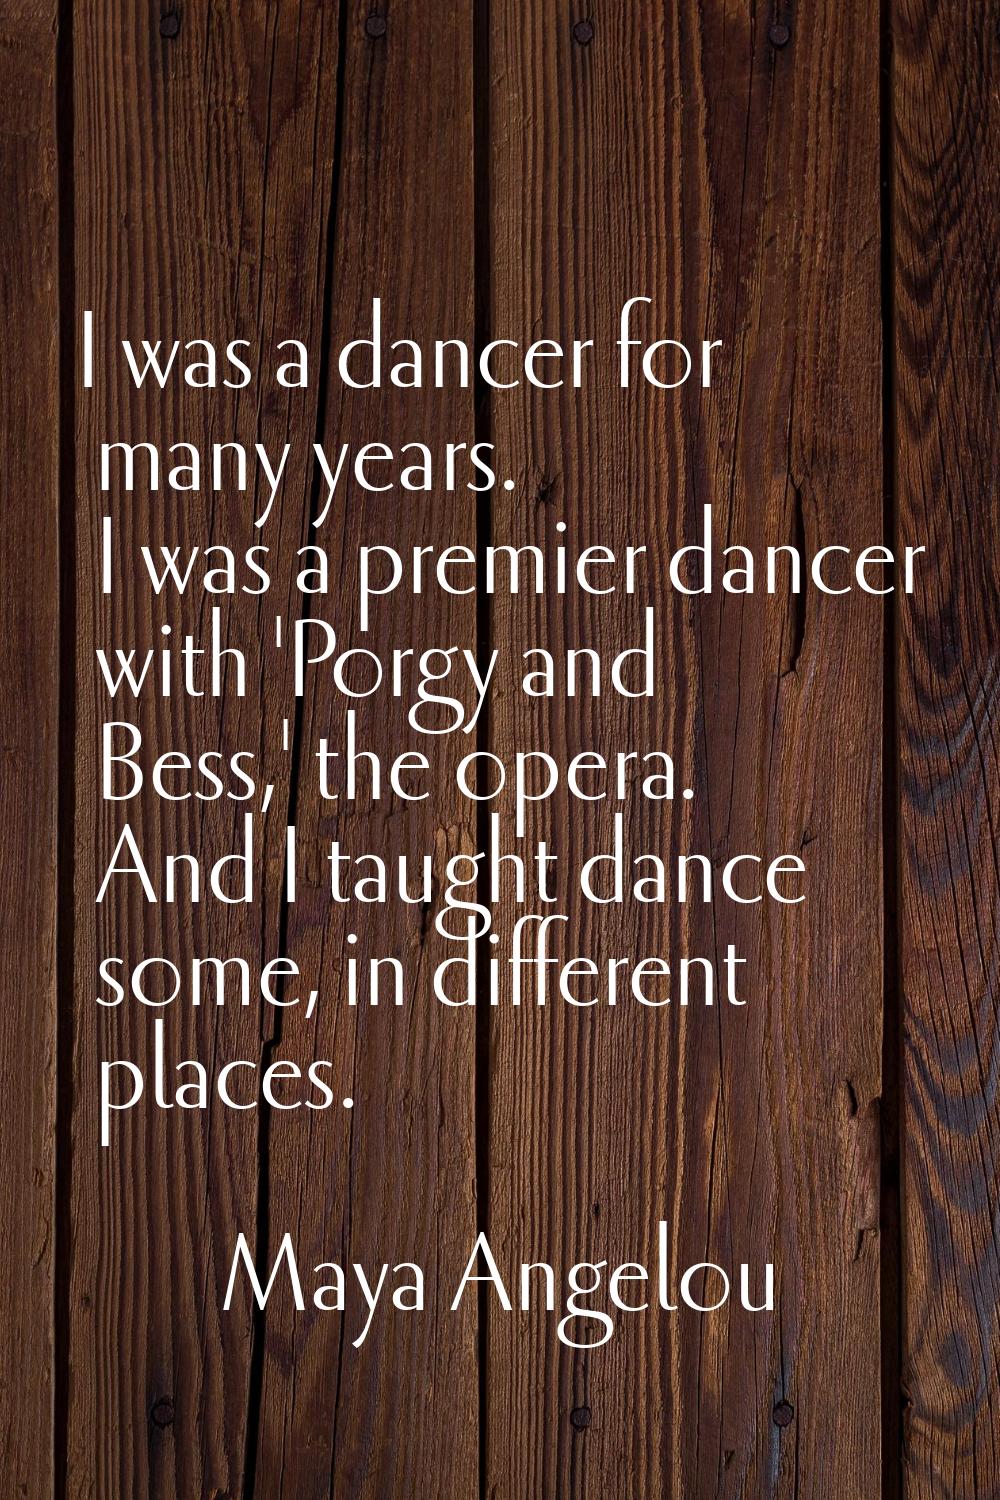 I was a dancer for many years. I was a premier dancer with 'Porgy and Bess,' the opera. And I taugh